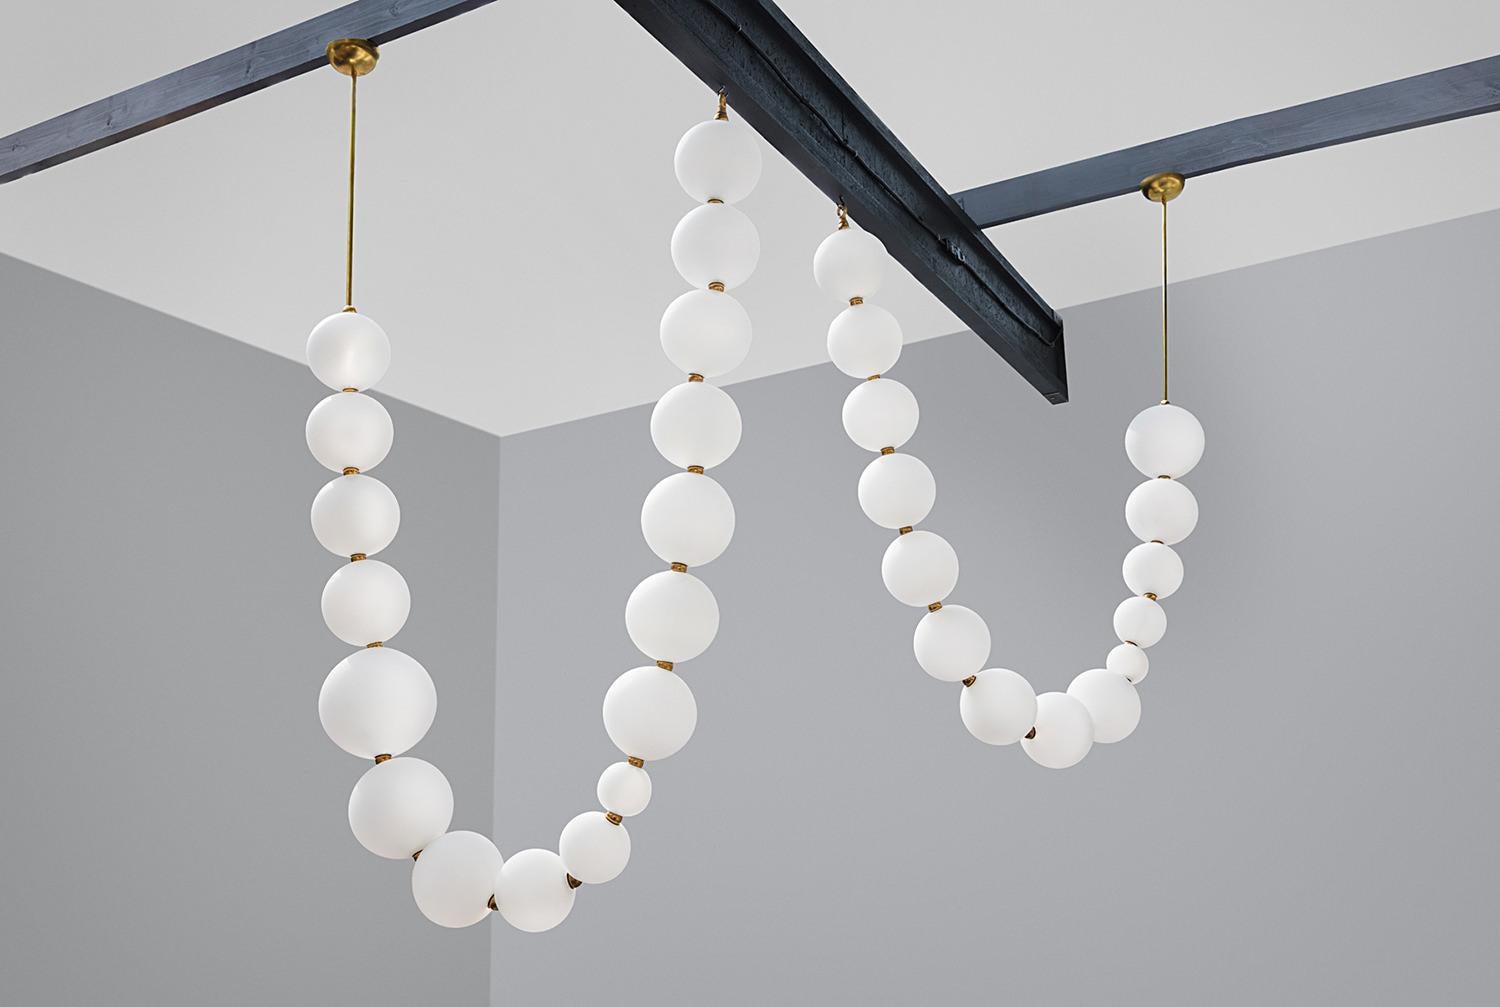 Pair of pearl necklace pendant lights - Ludovic Clément d’Armont
Every creation of Ludovic Clément d’Armont can be made to order in any requested dimensions. Please contact us for custom-made creations.
Blown glass and brass
Dimensions: Glass Diam